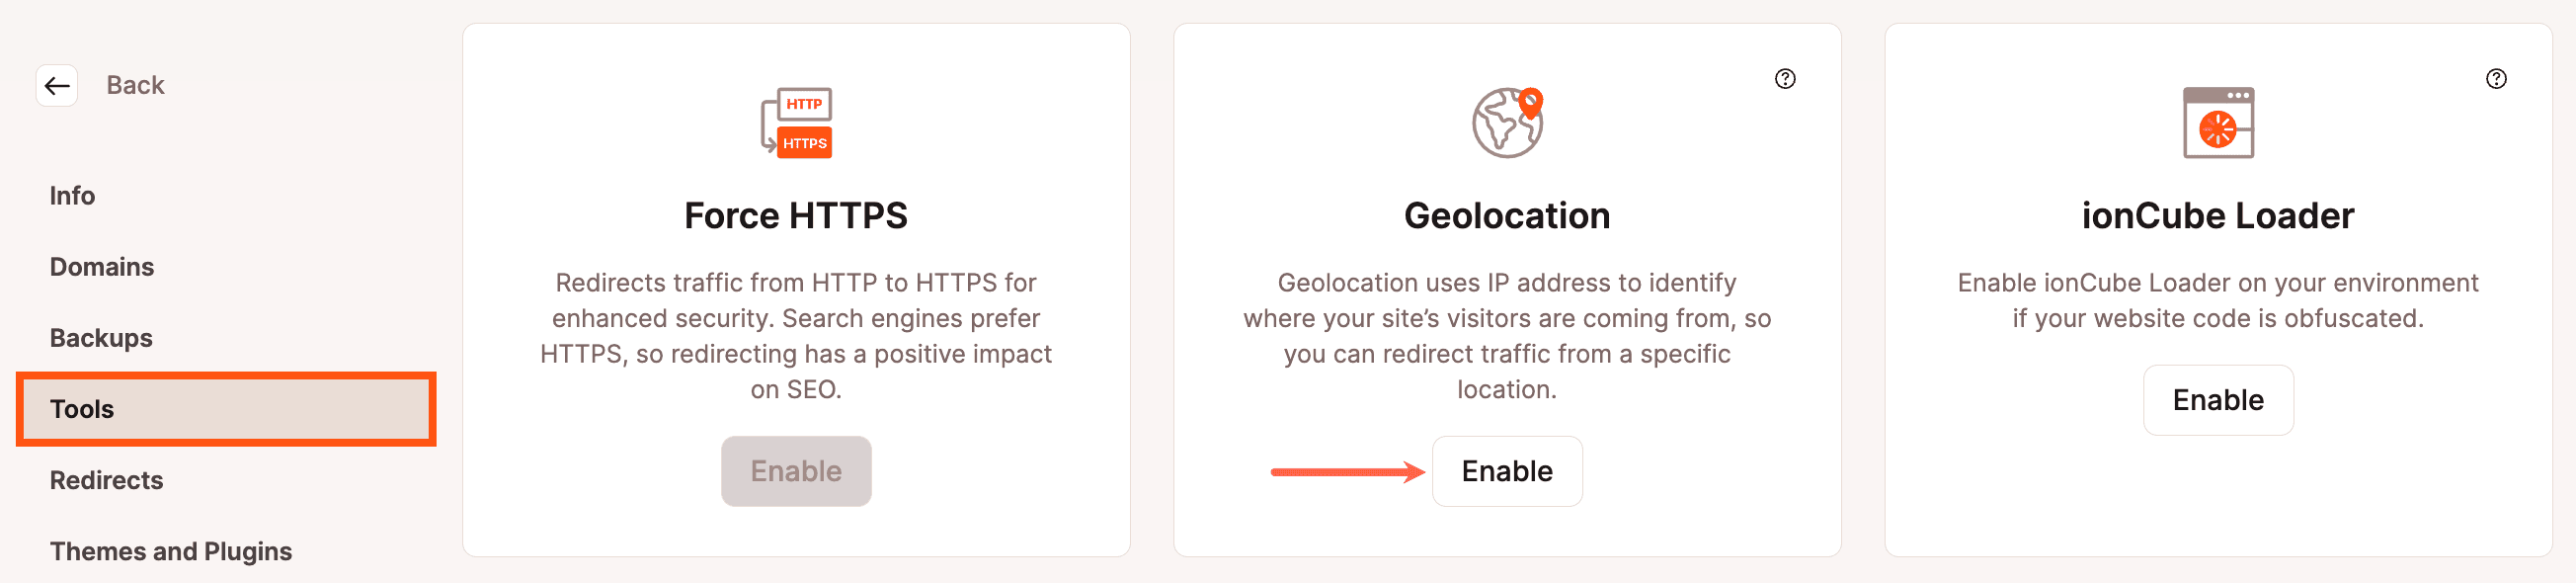 Geolocation can be enabled in the Tools section of MyKinsta.